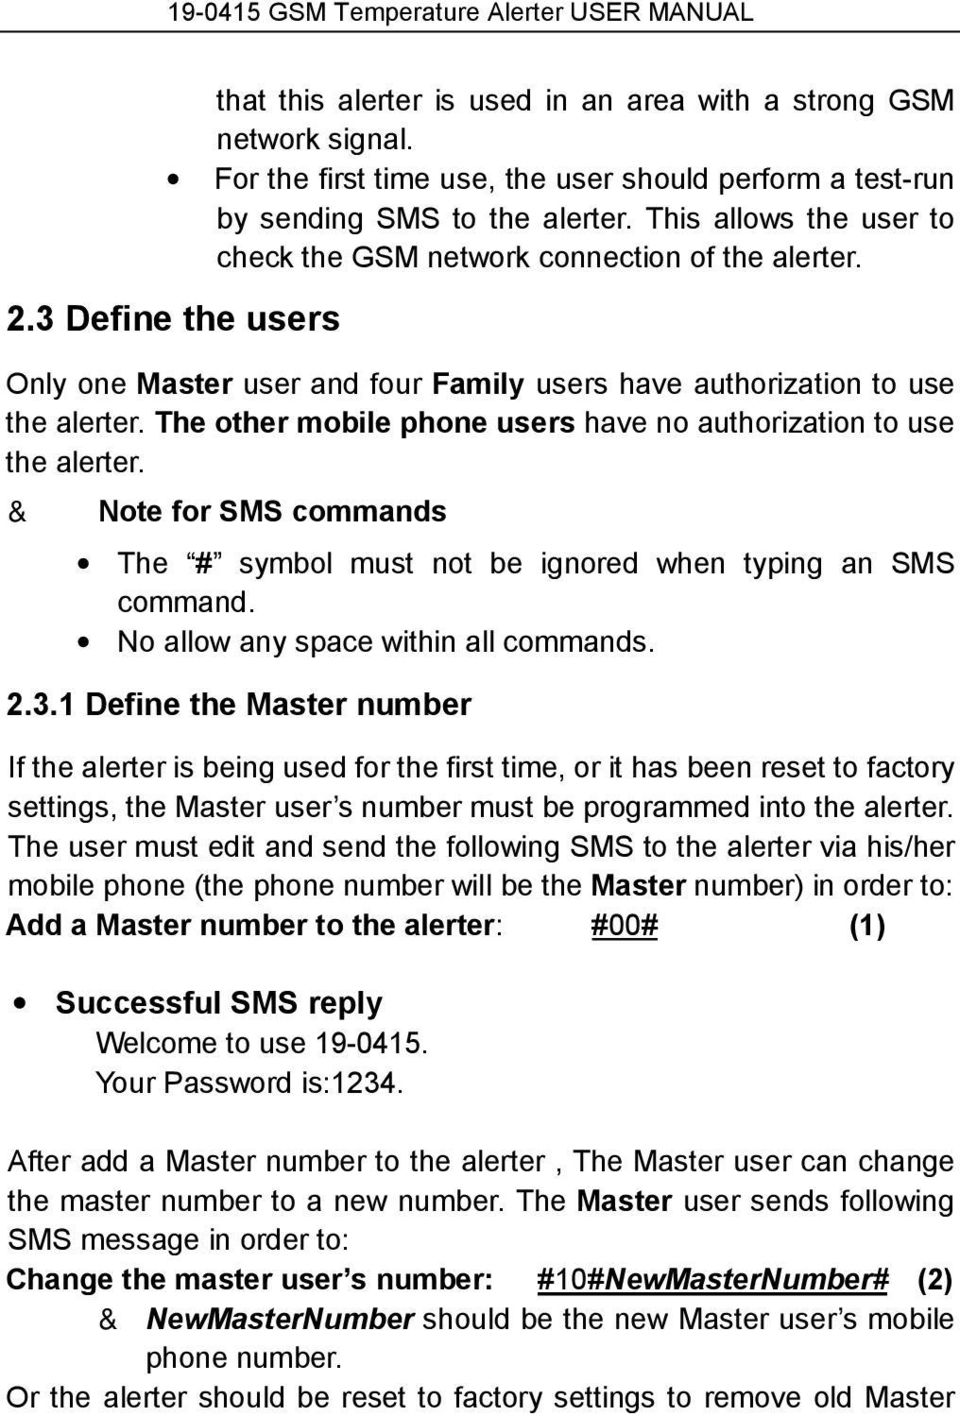 The other mobile phone users have no authorization to use the alerter. & Note for SMS commands The # symbol must not be ignored when typing an SMS command. No allow any space within all commands. 2.3.